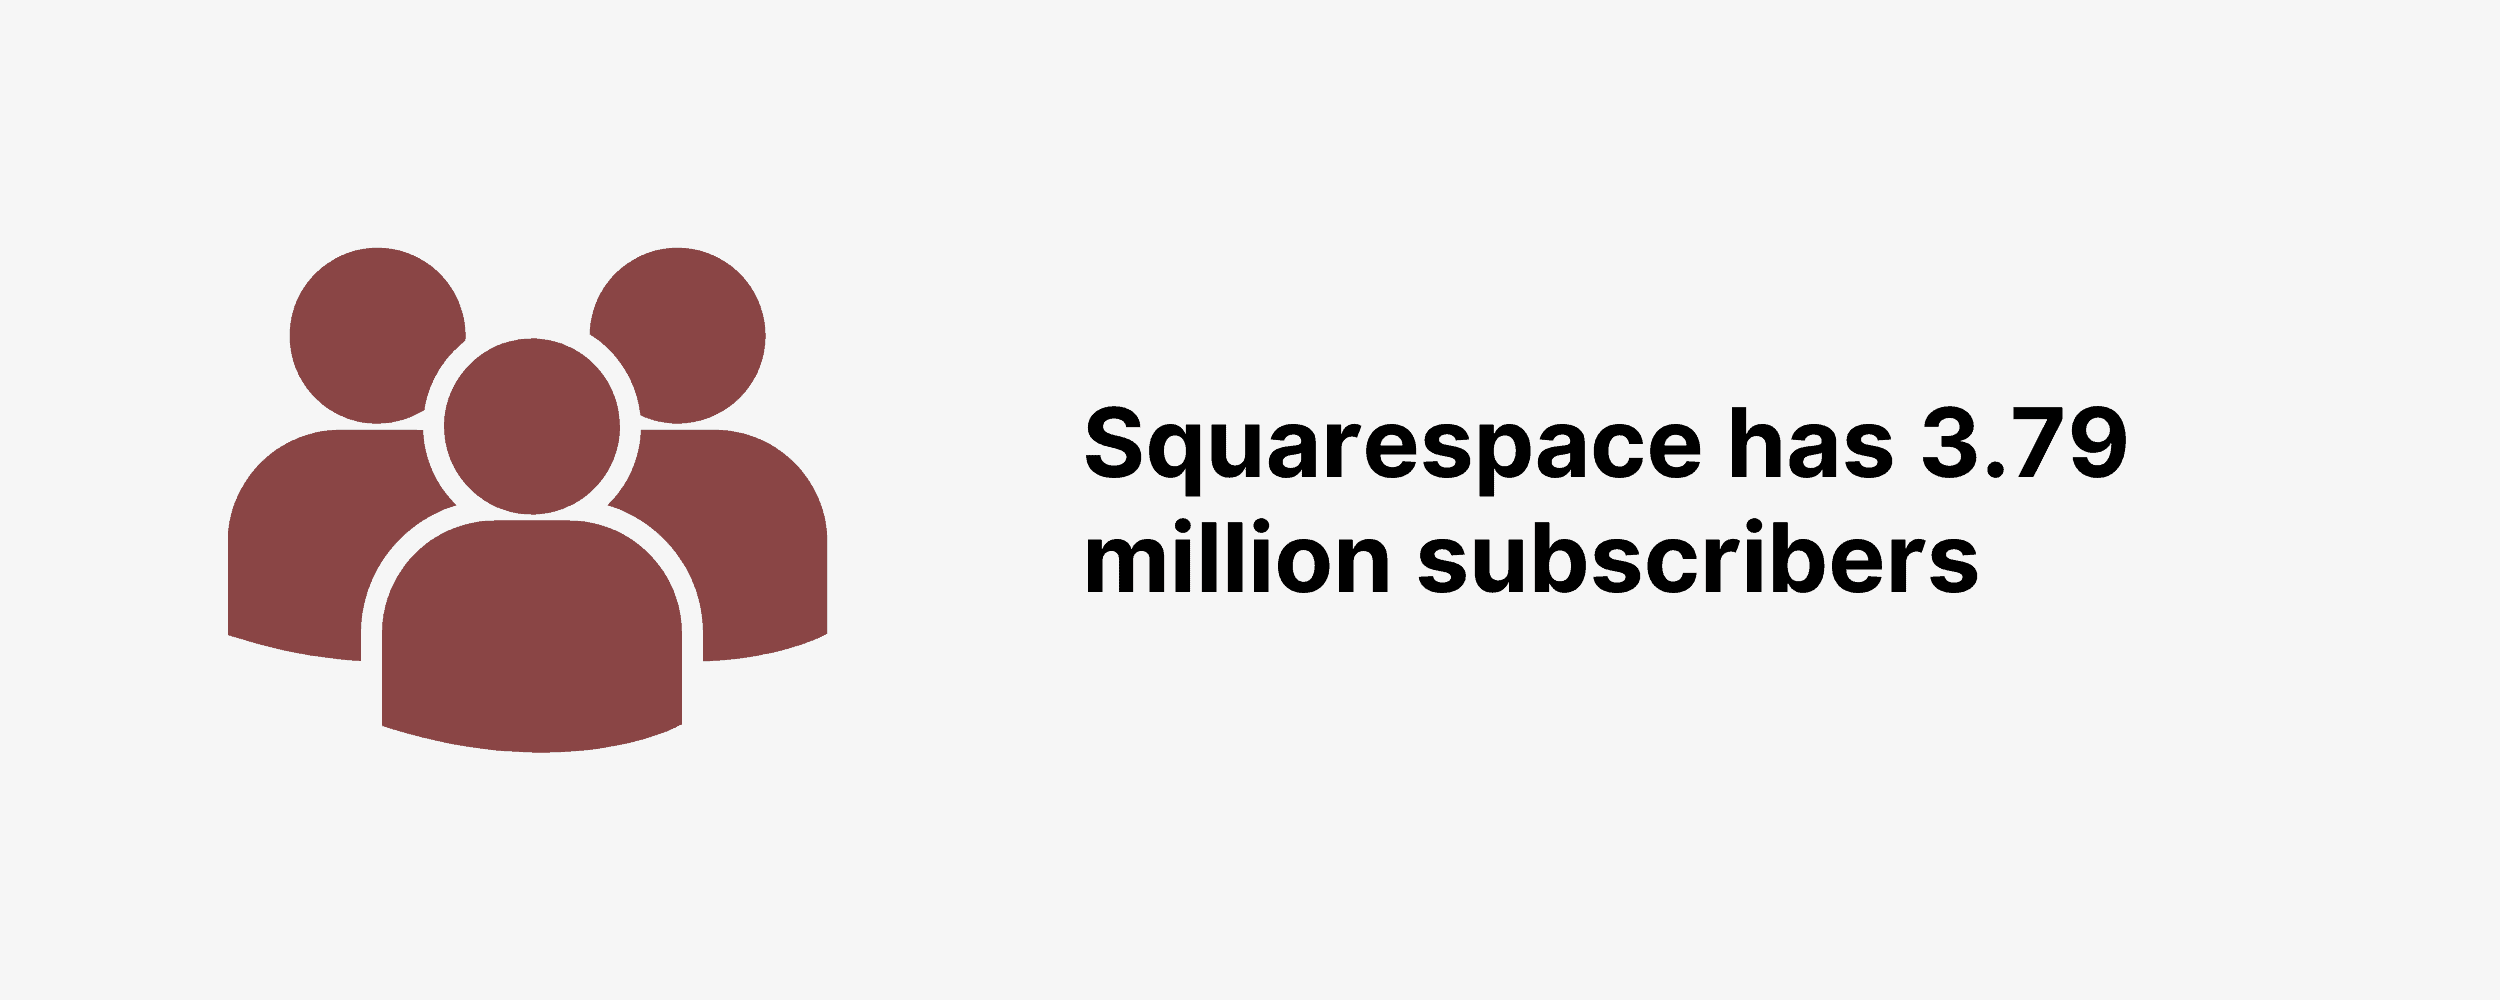 Squarespace has 3.79 million subscribers